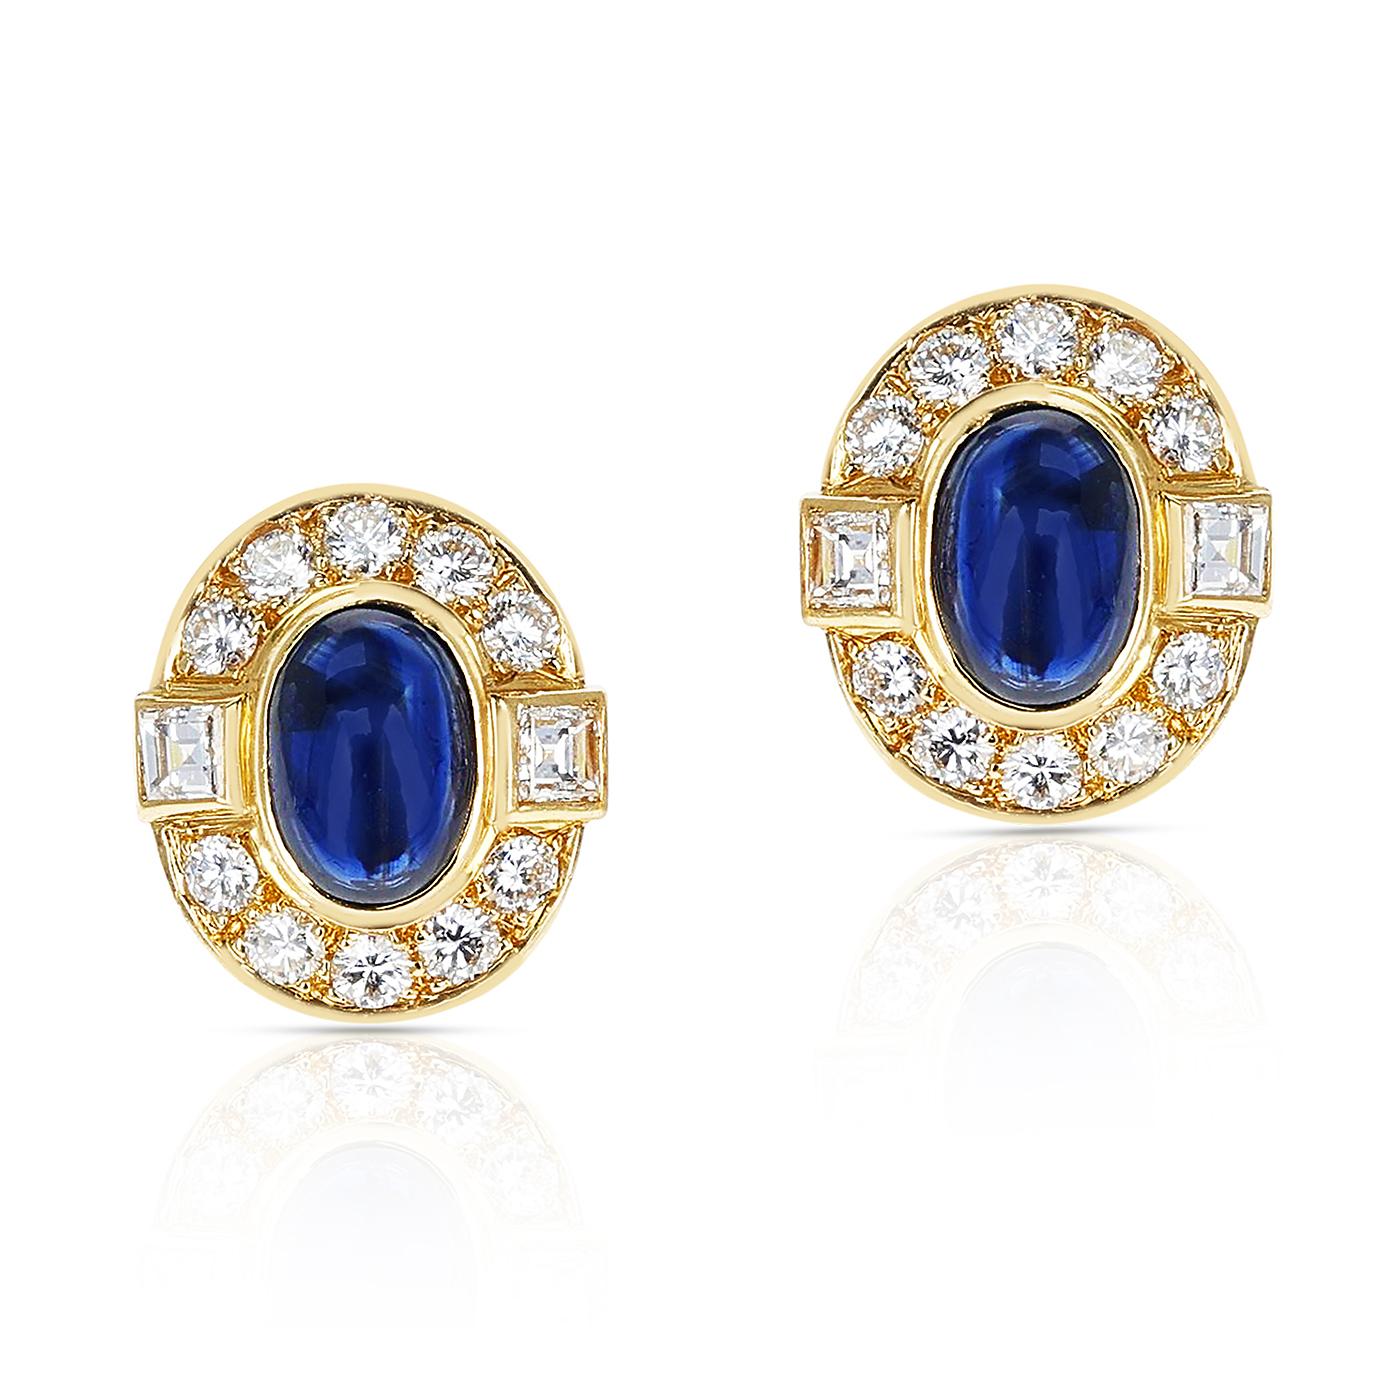 Cartier Paris Sapphire Cabochon and Diamond Earrings, 18K Yellow Gold In Excellent Condition For Sale In New York, NY